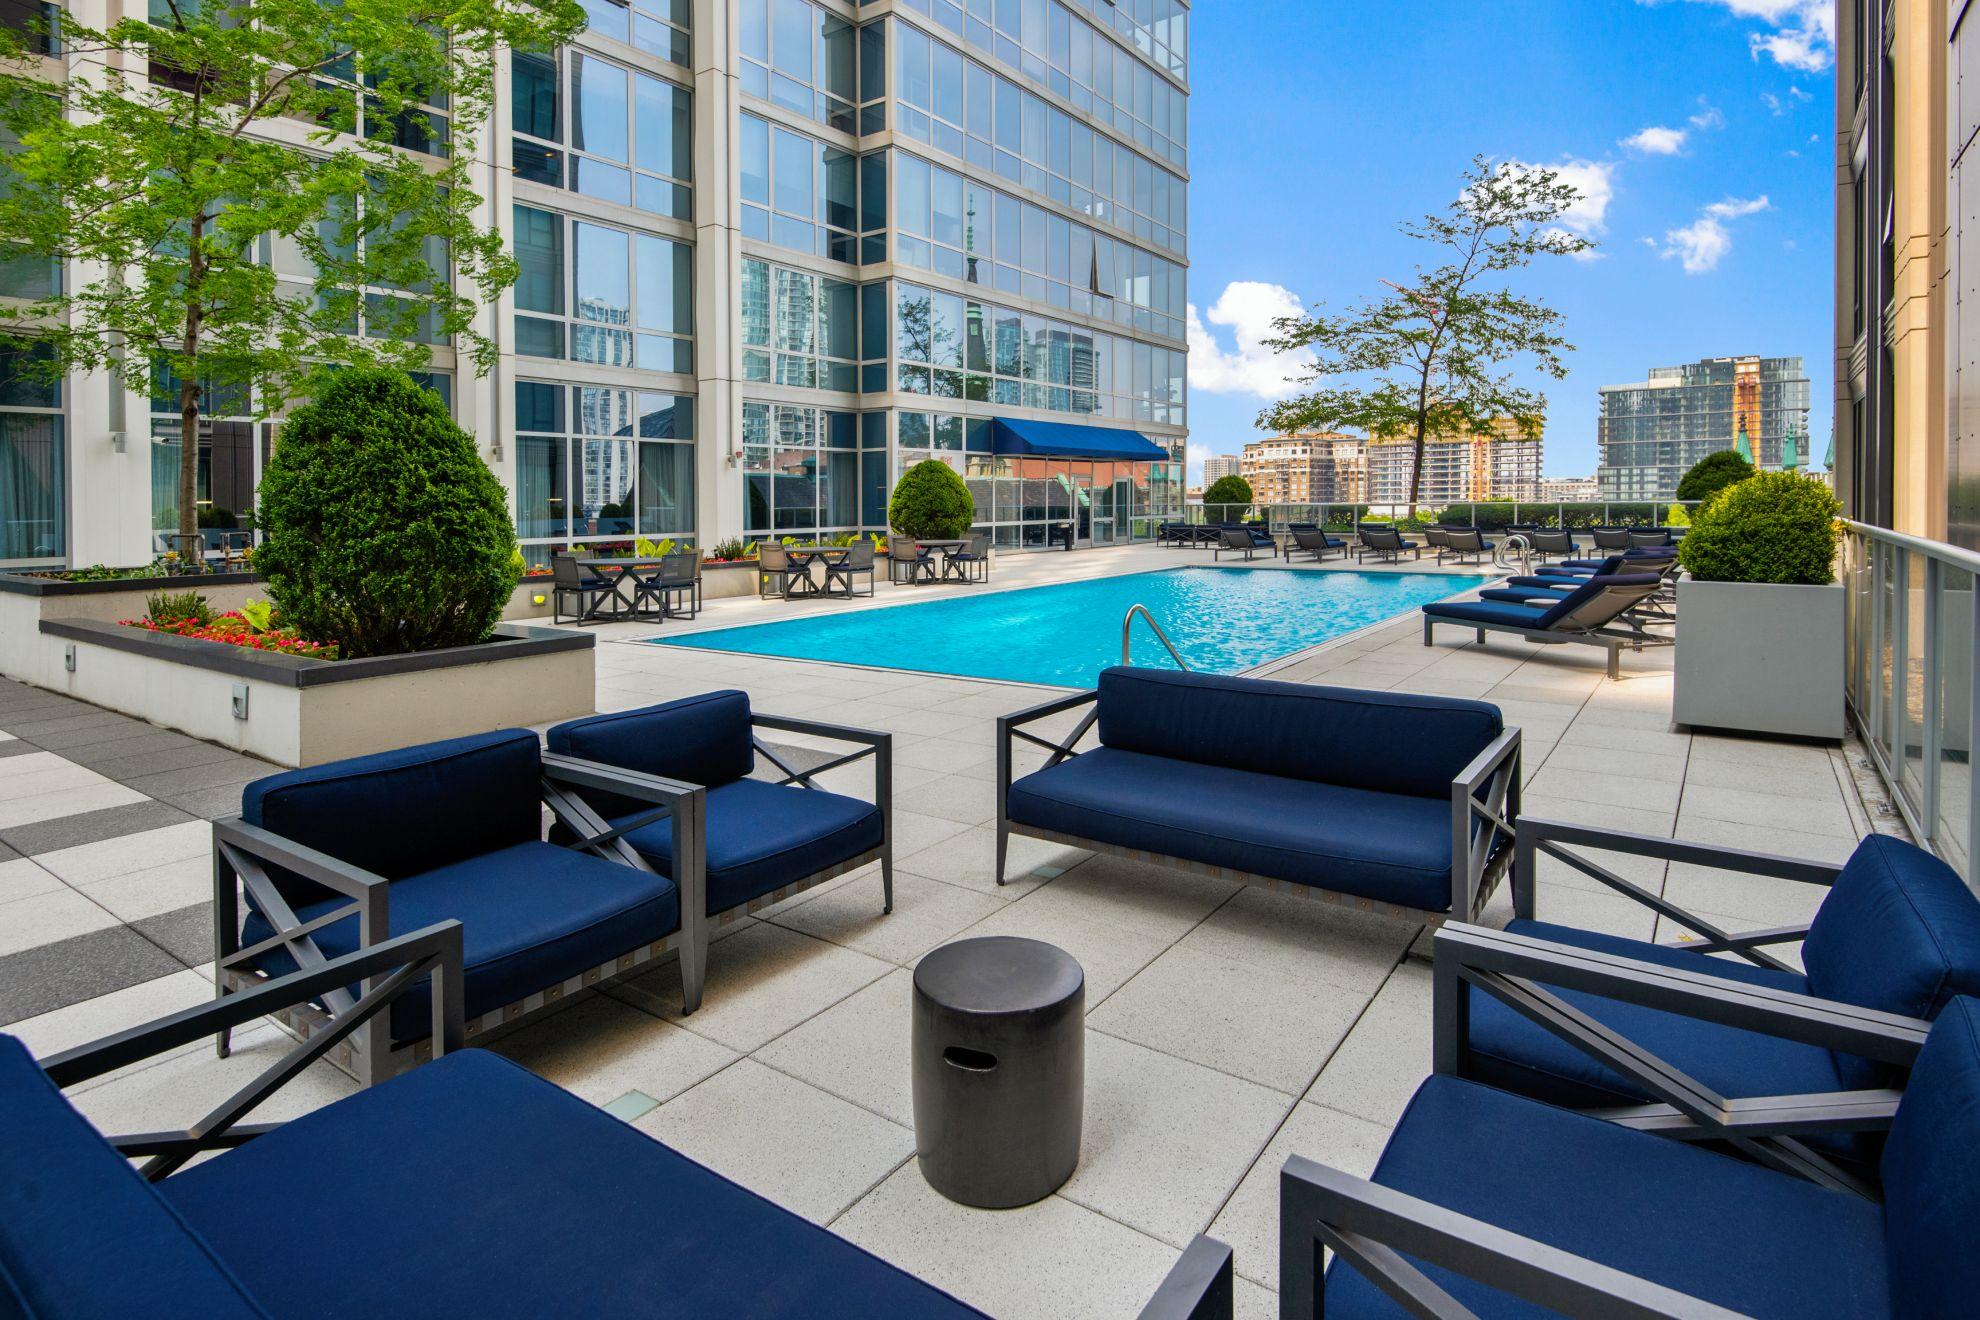 Two West Ext Amenities Pooland Lounge Area Jim Tschetter2023 1